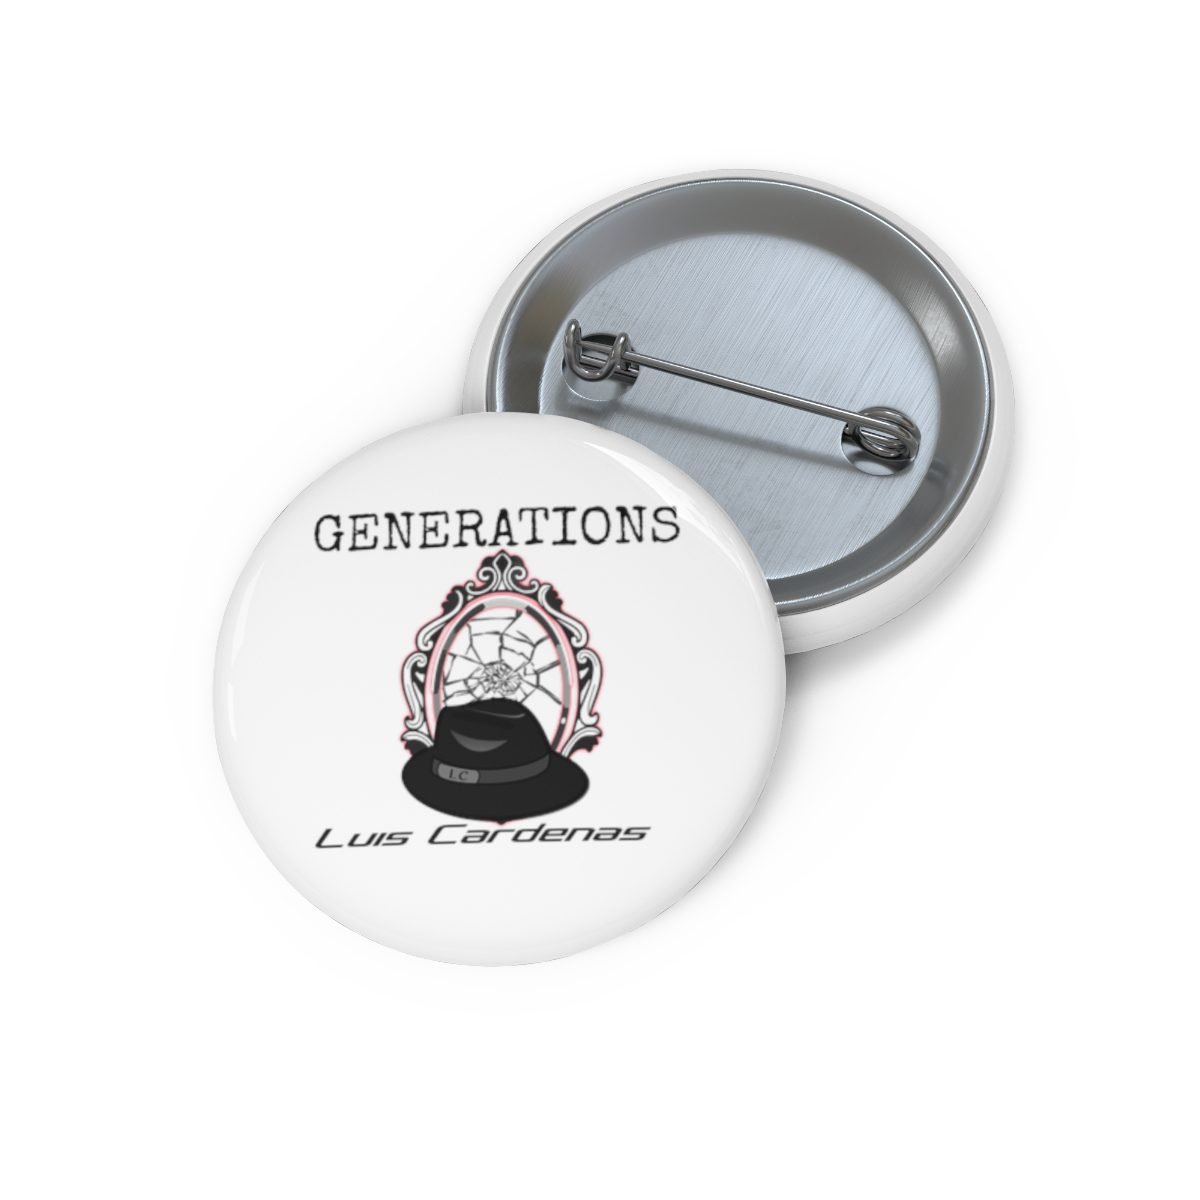 Luis Cardenas – Generations Pin Buttons